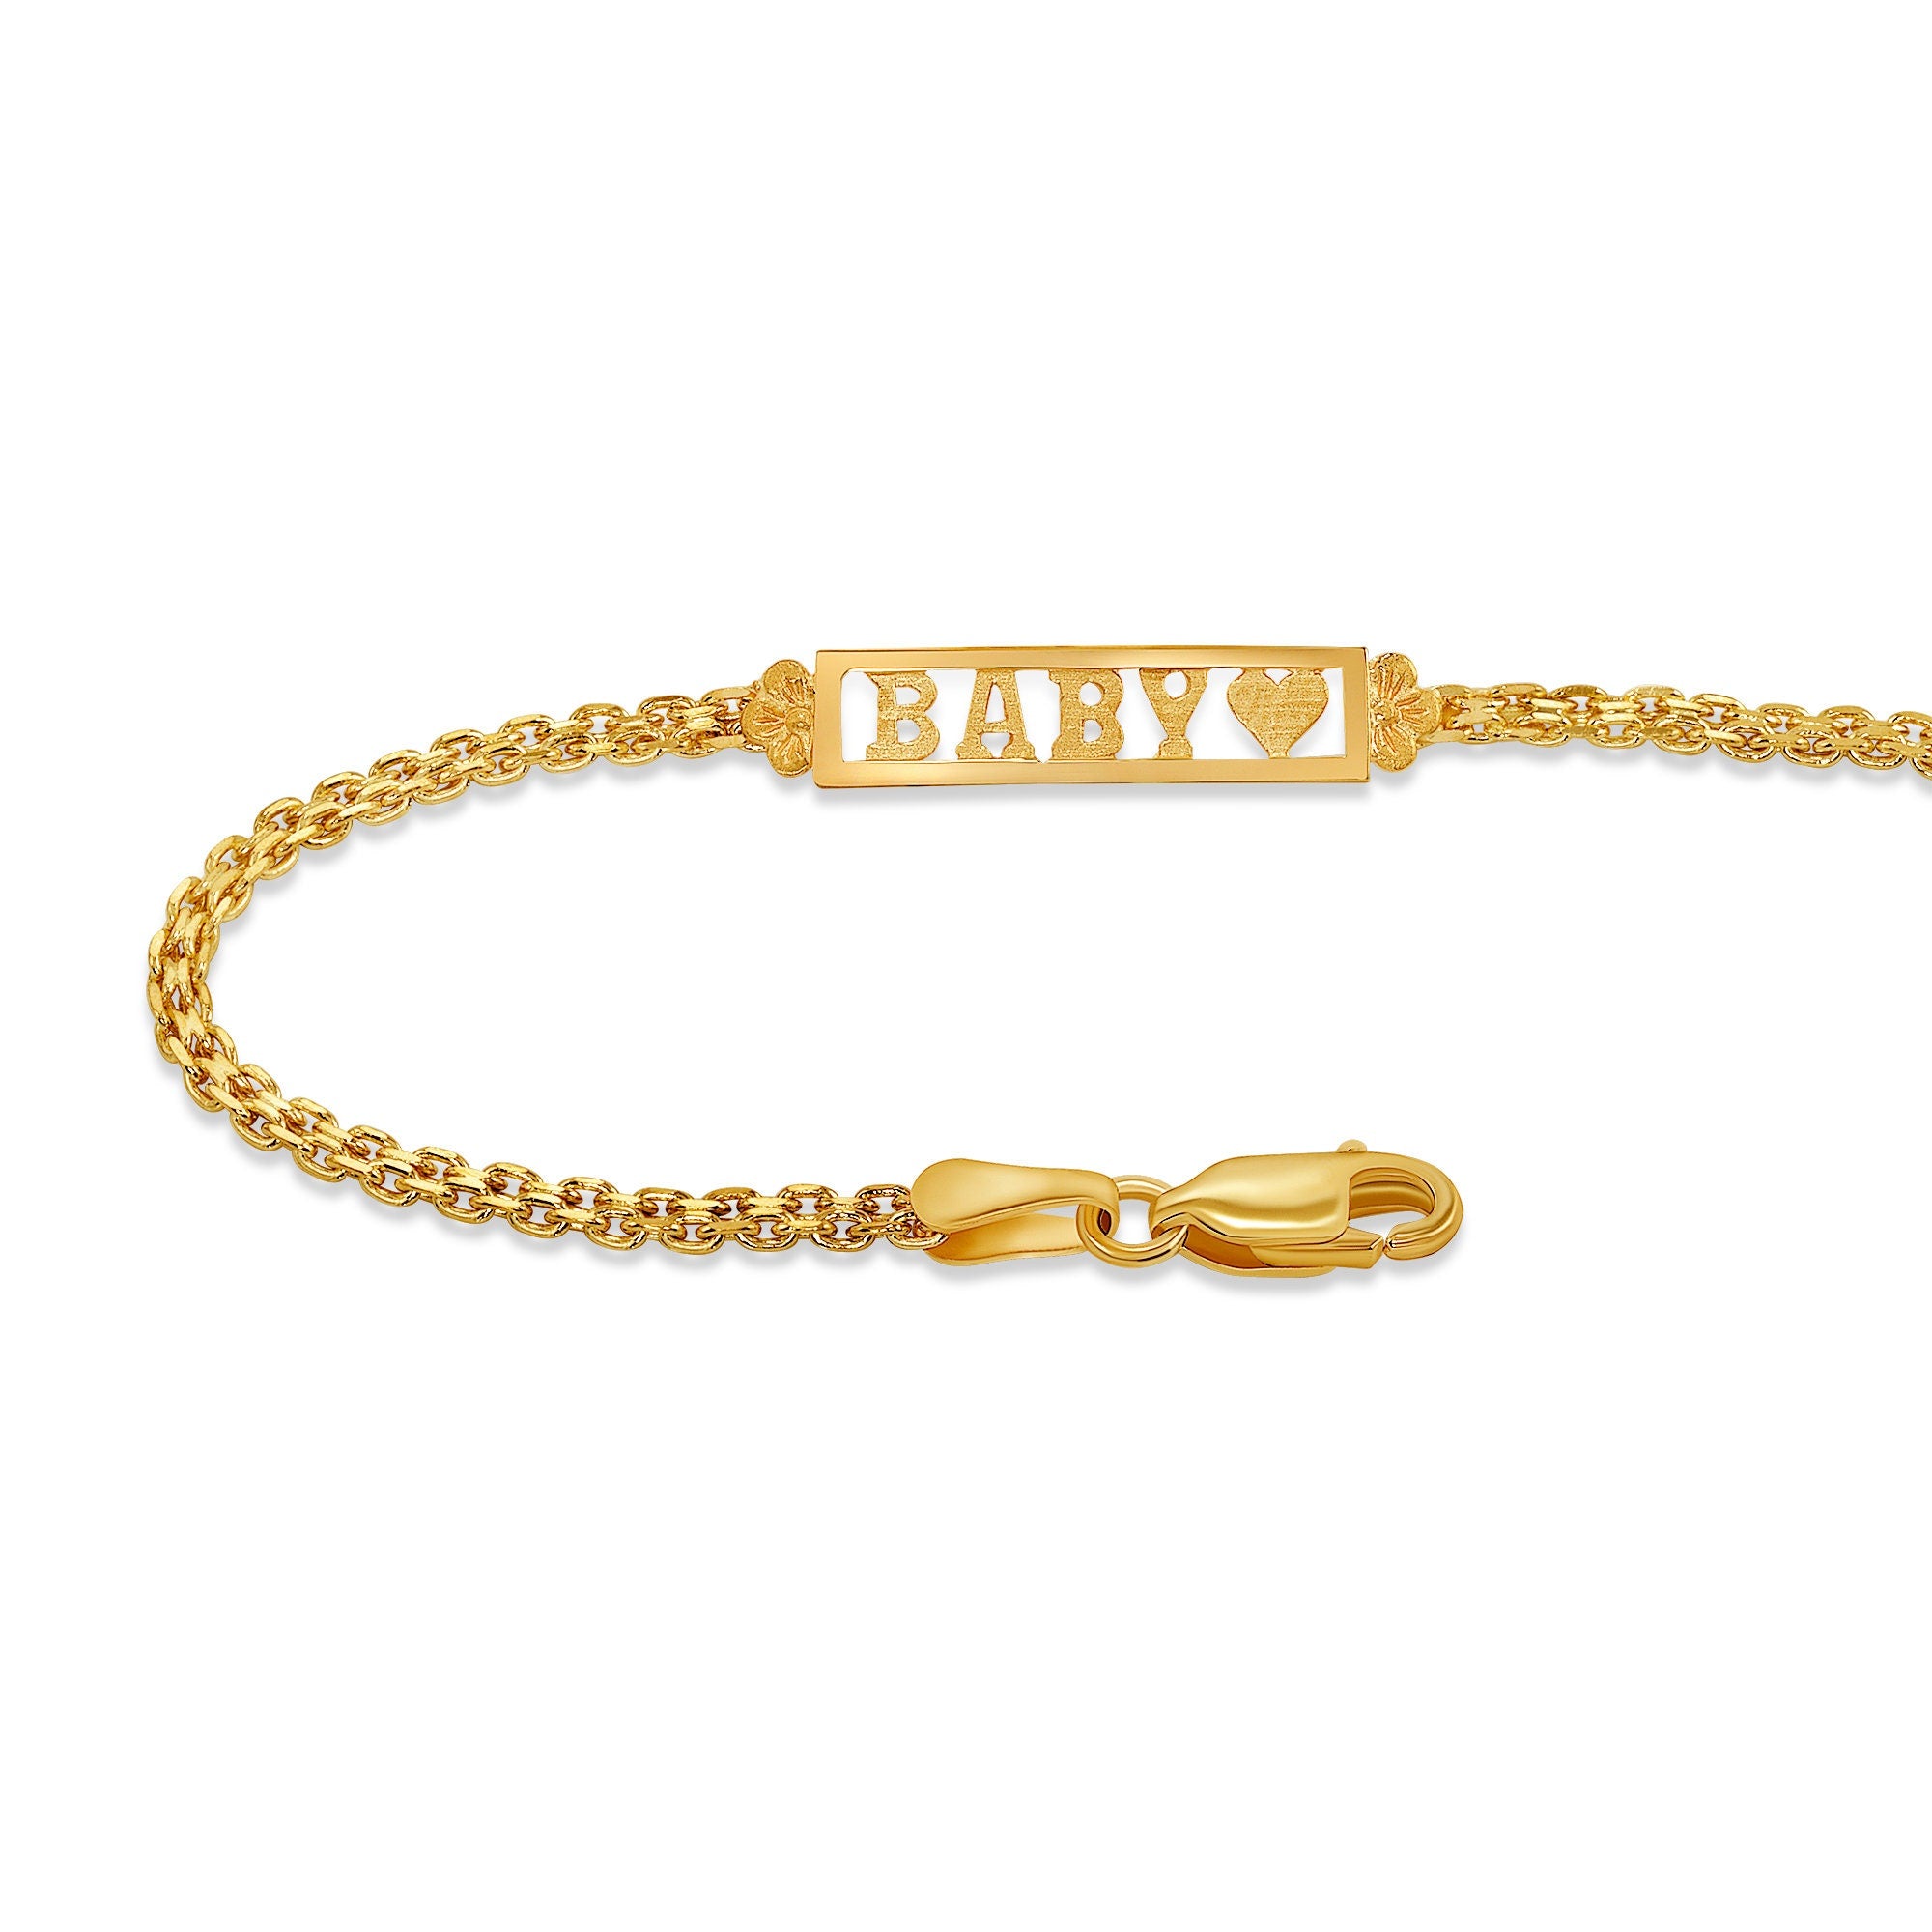 14k solid yellow gold Baby ID bracelet